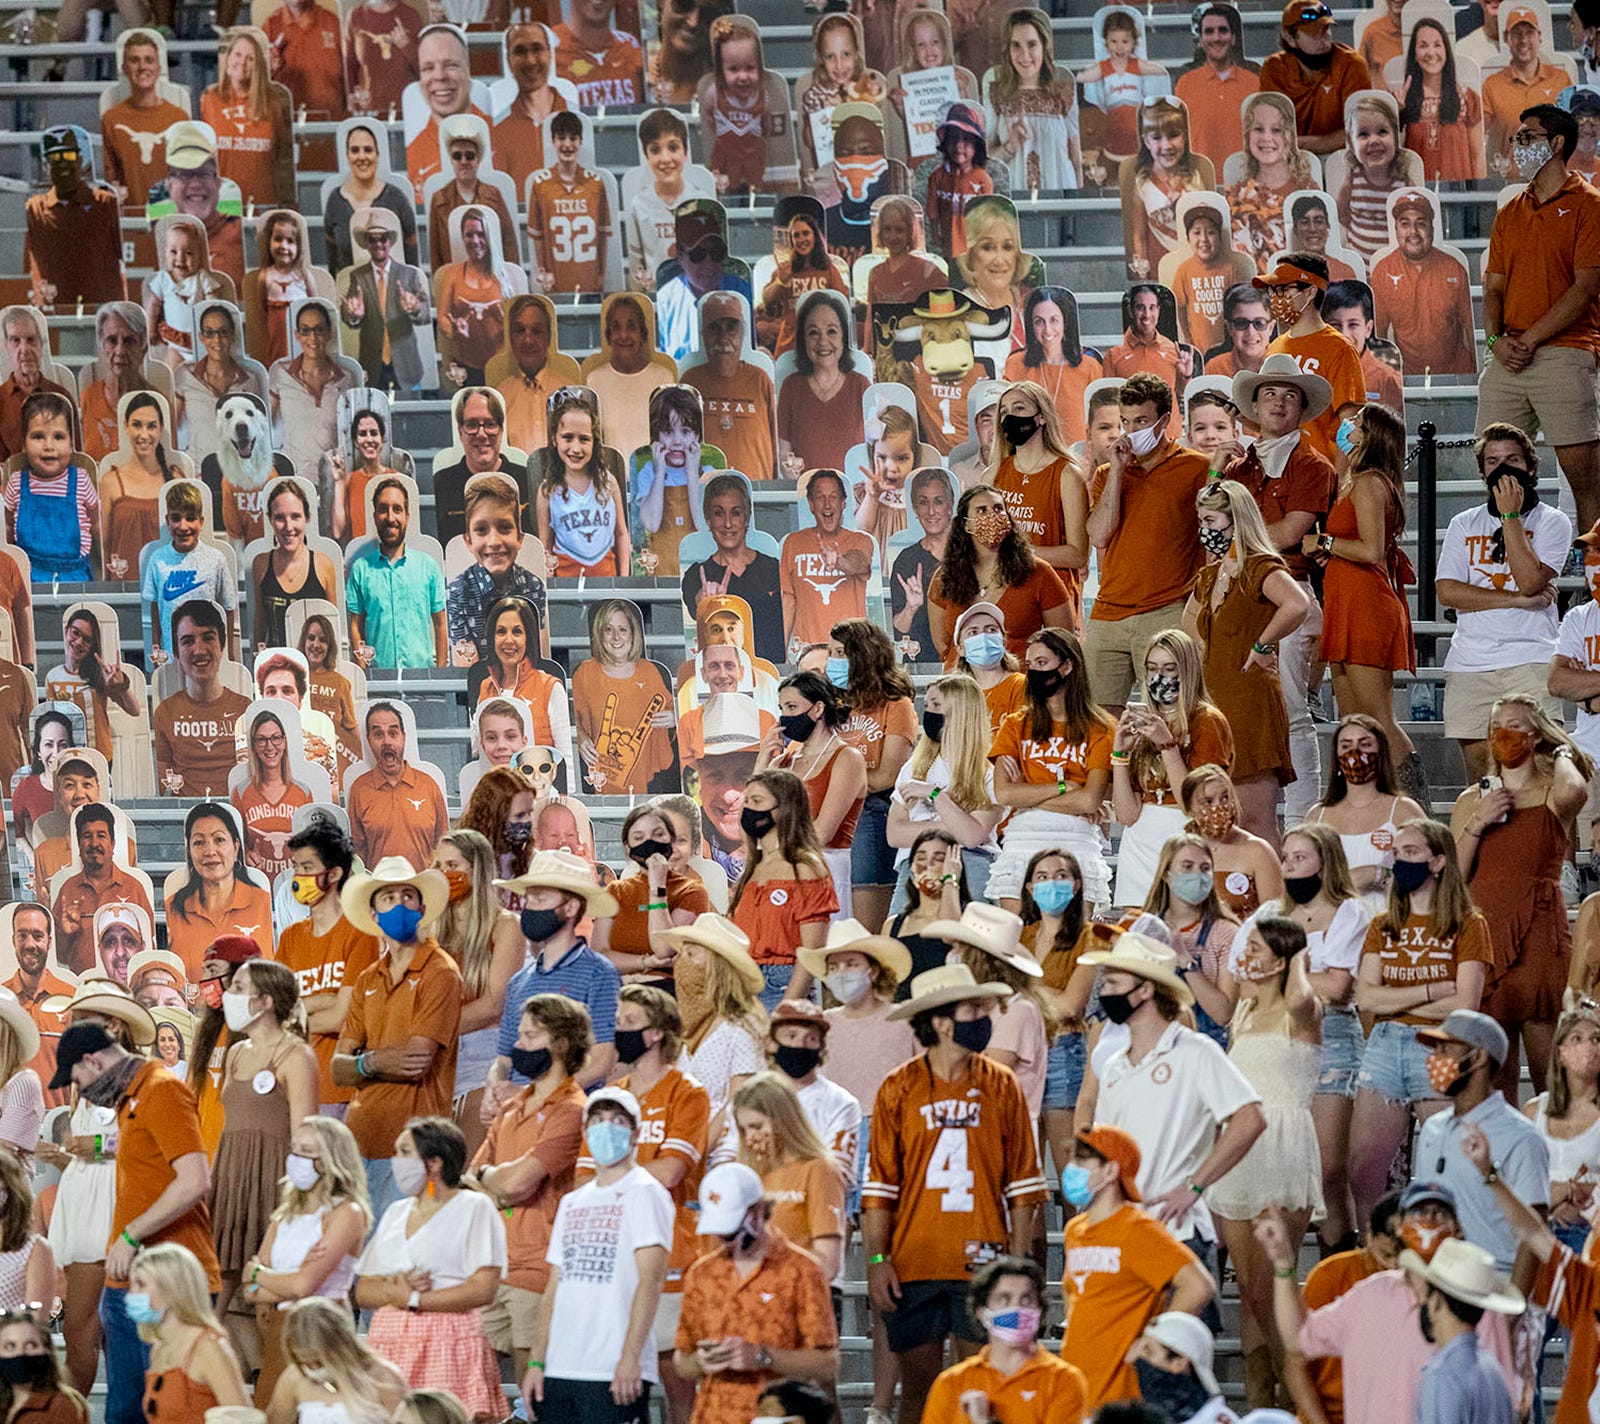 Cut out images of Texas Longhorns fans mixed with fans attending the game fill the lower level seats during Texas Longhorns against UTEP Miners NCAA football game in Austin, Texas on Saturday, Sept 12, 2020.